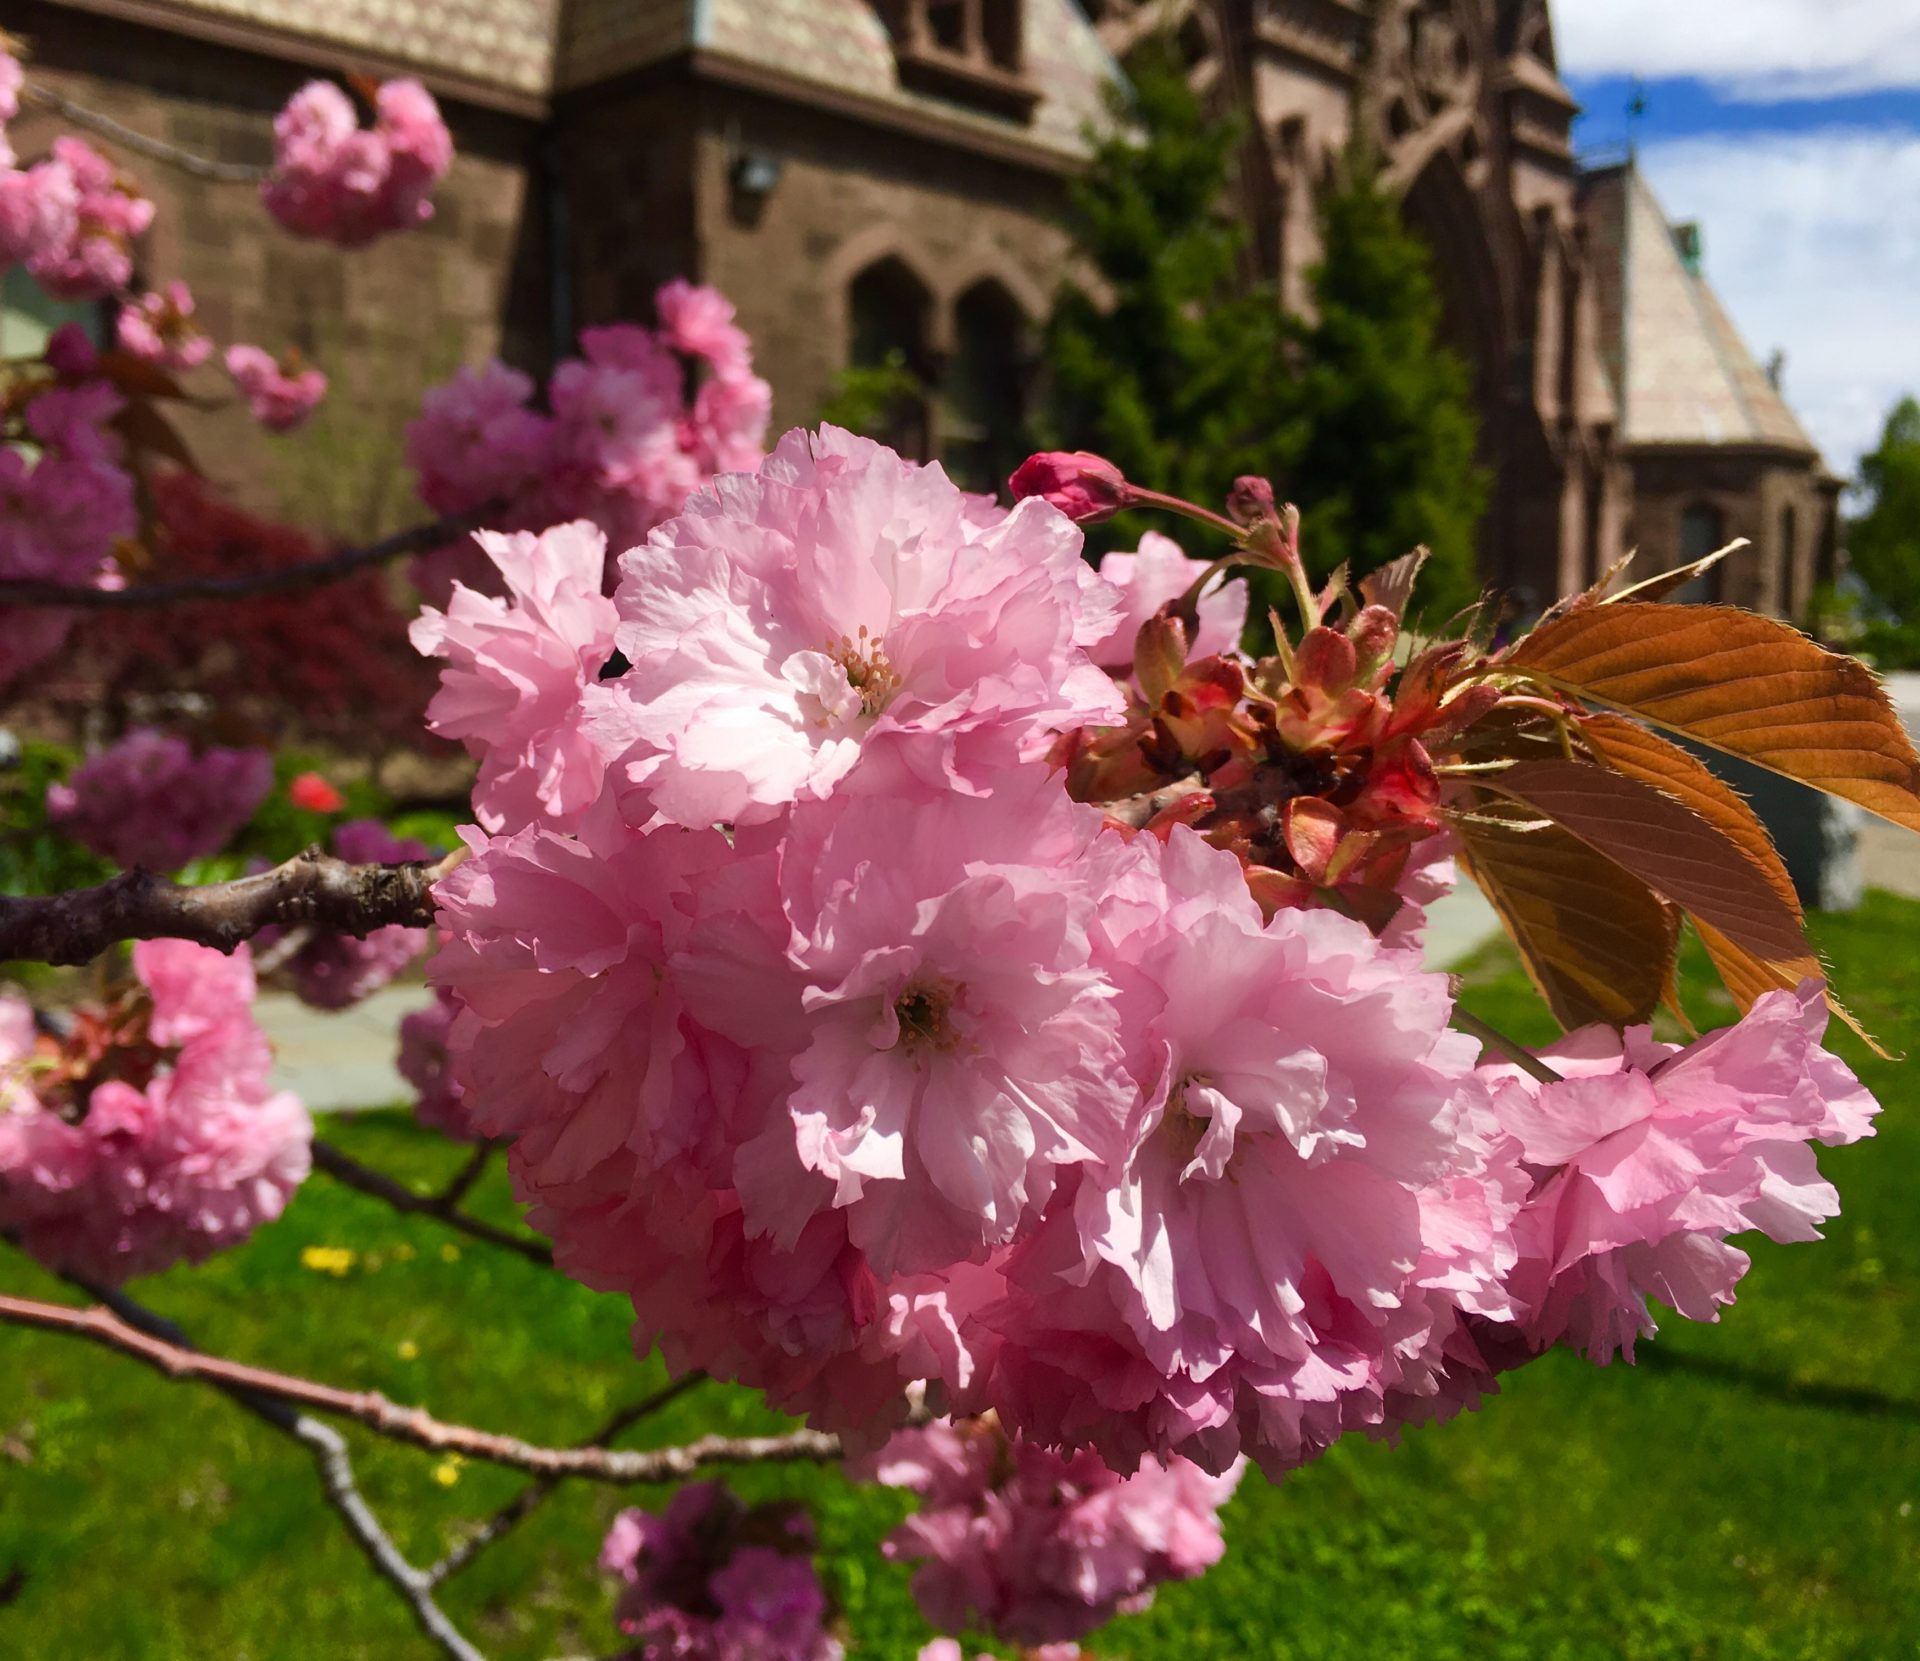 Come see Green-Wood Cemetery’s cherry blossoms